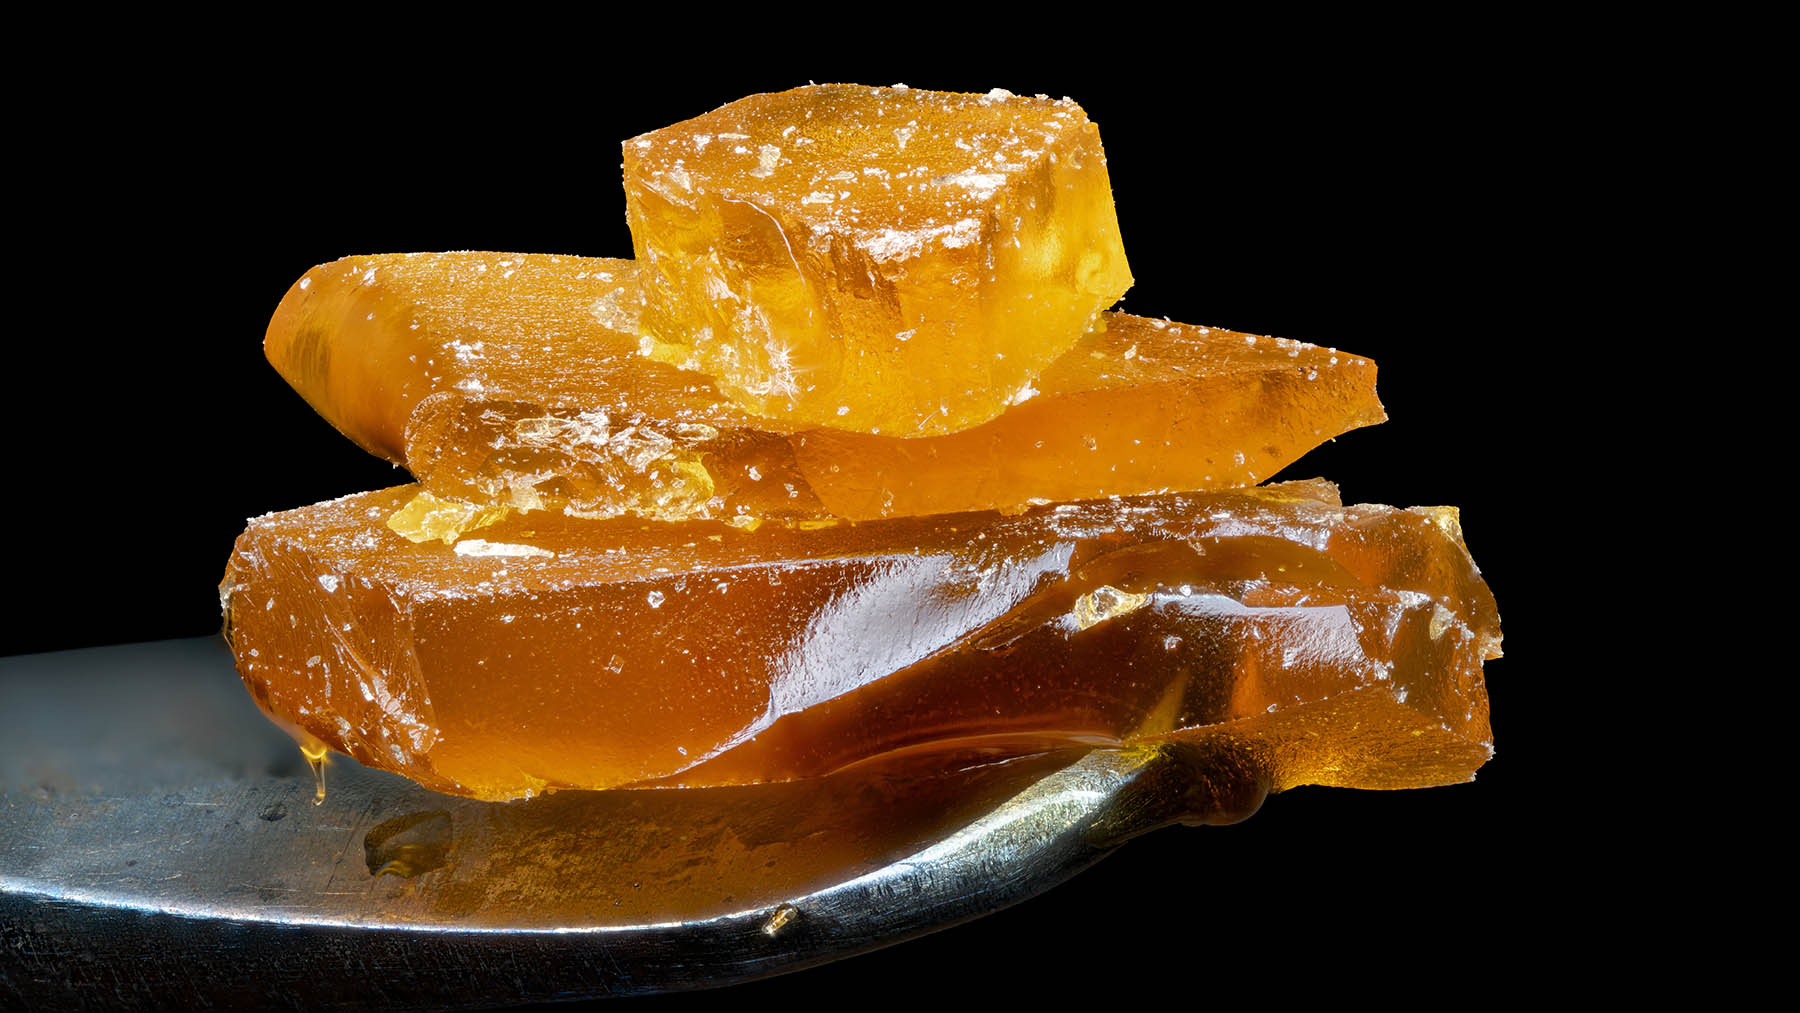 Cannabis Concentrates: From Shatter to Wax, What You Need to Know